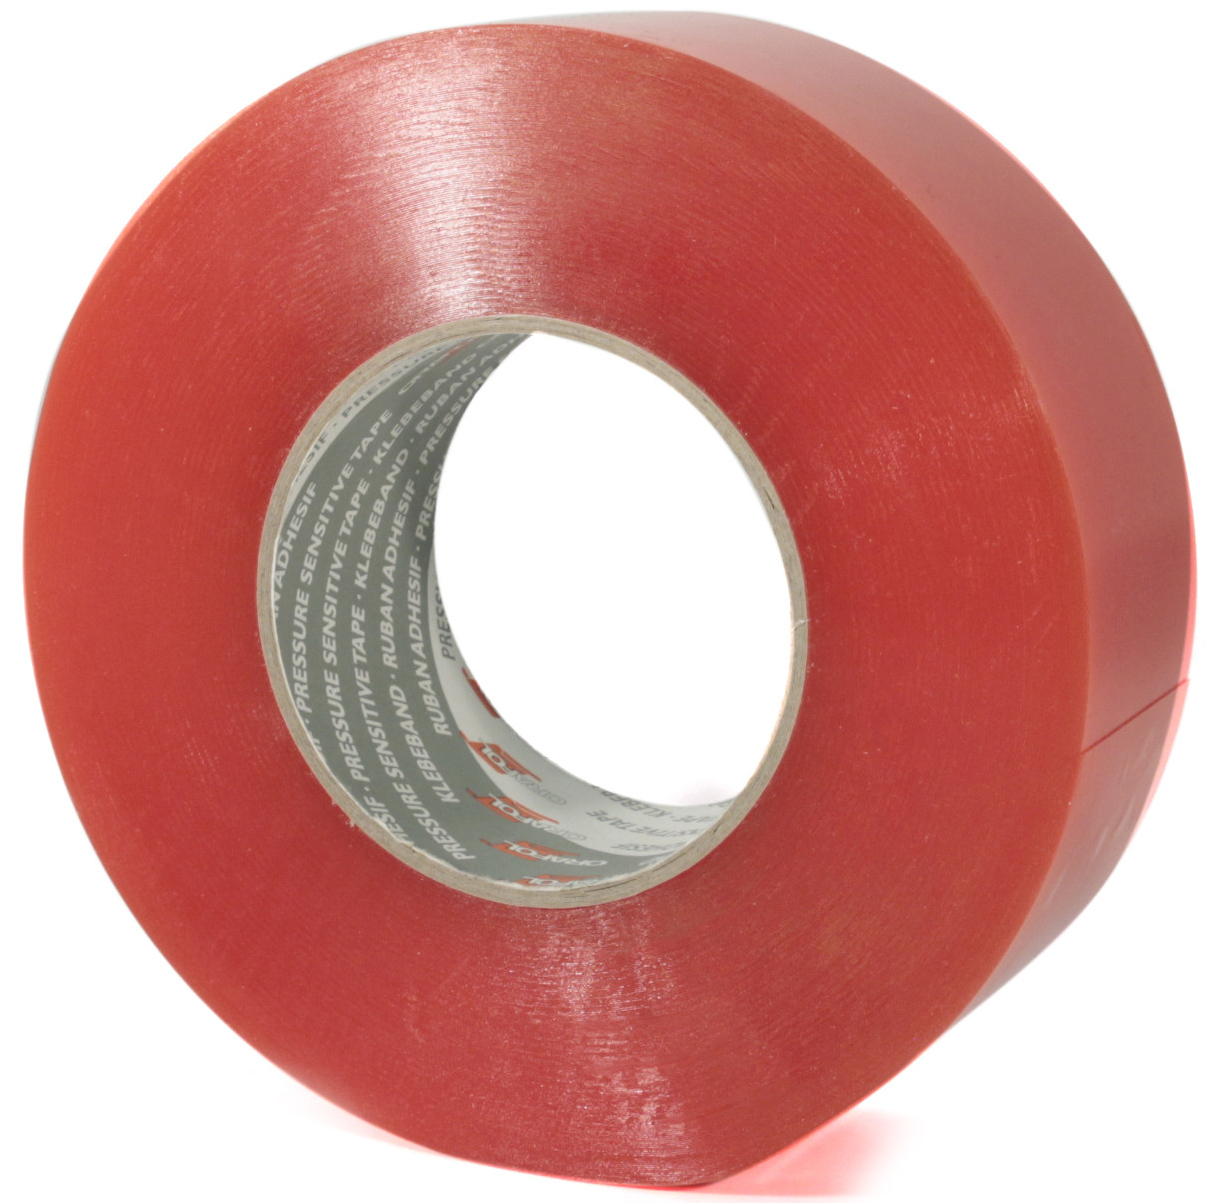 1/4IN x 36YD D/F CLEAR TAPE w/Red Liner - Double-sided Adhesive Tapes